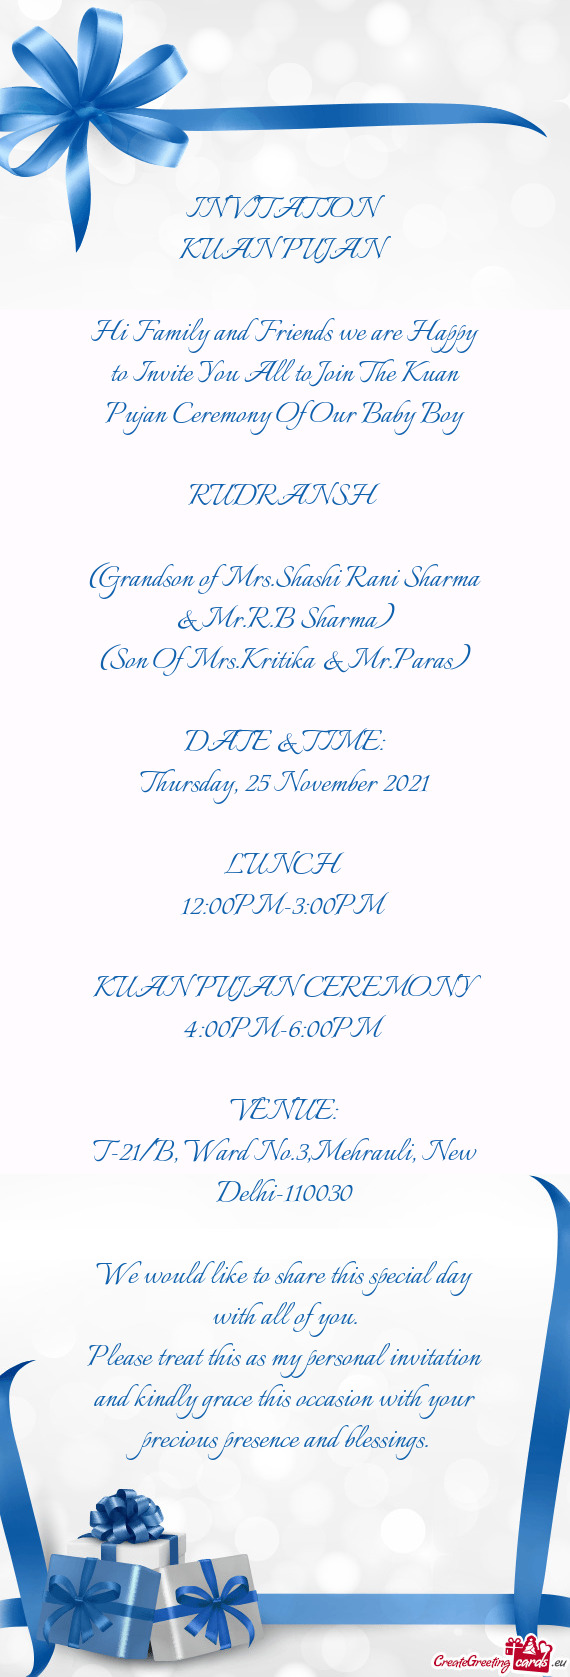 Hi Family and Friends we are Happy to Invite You All to Join The Kuan Pujan Ceremony Of Our Baby Boy